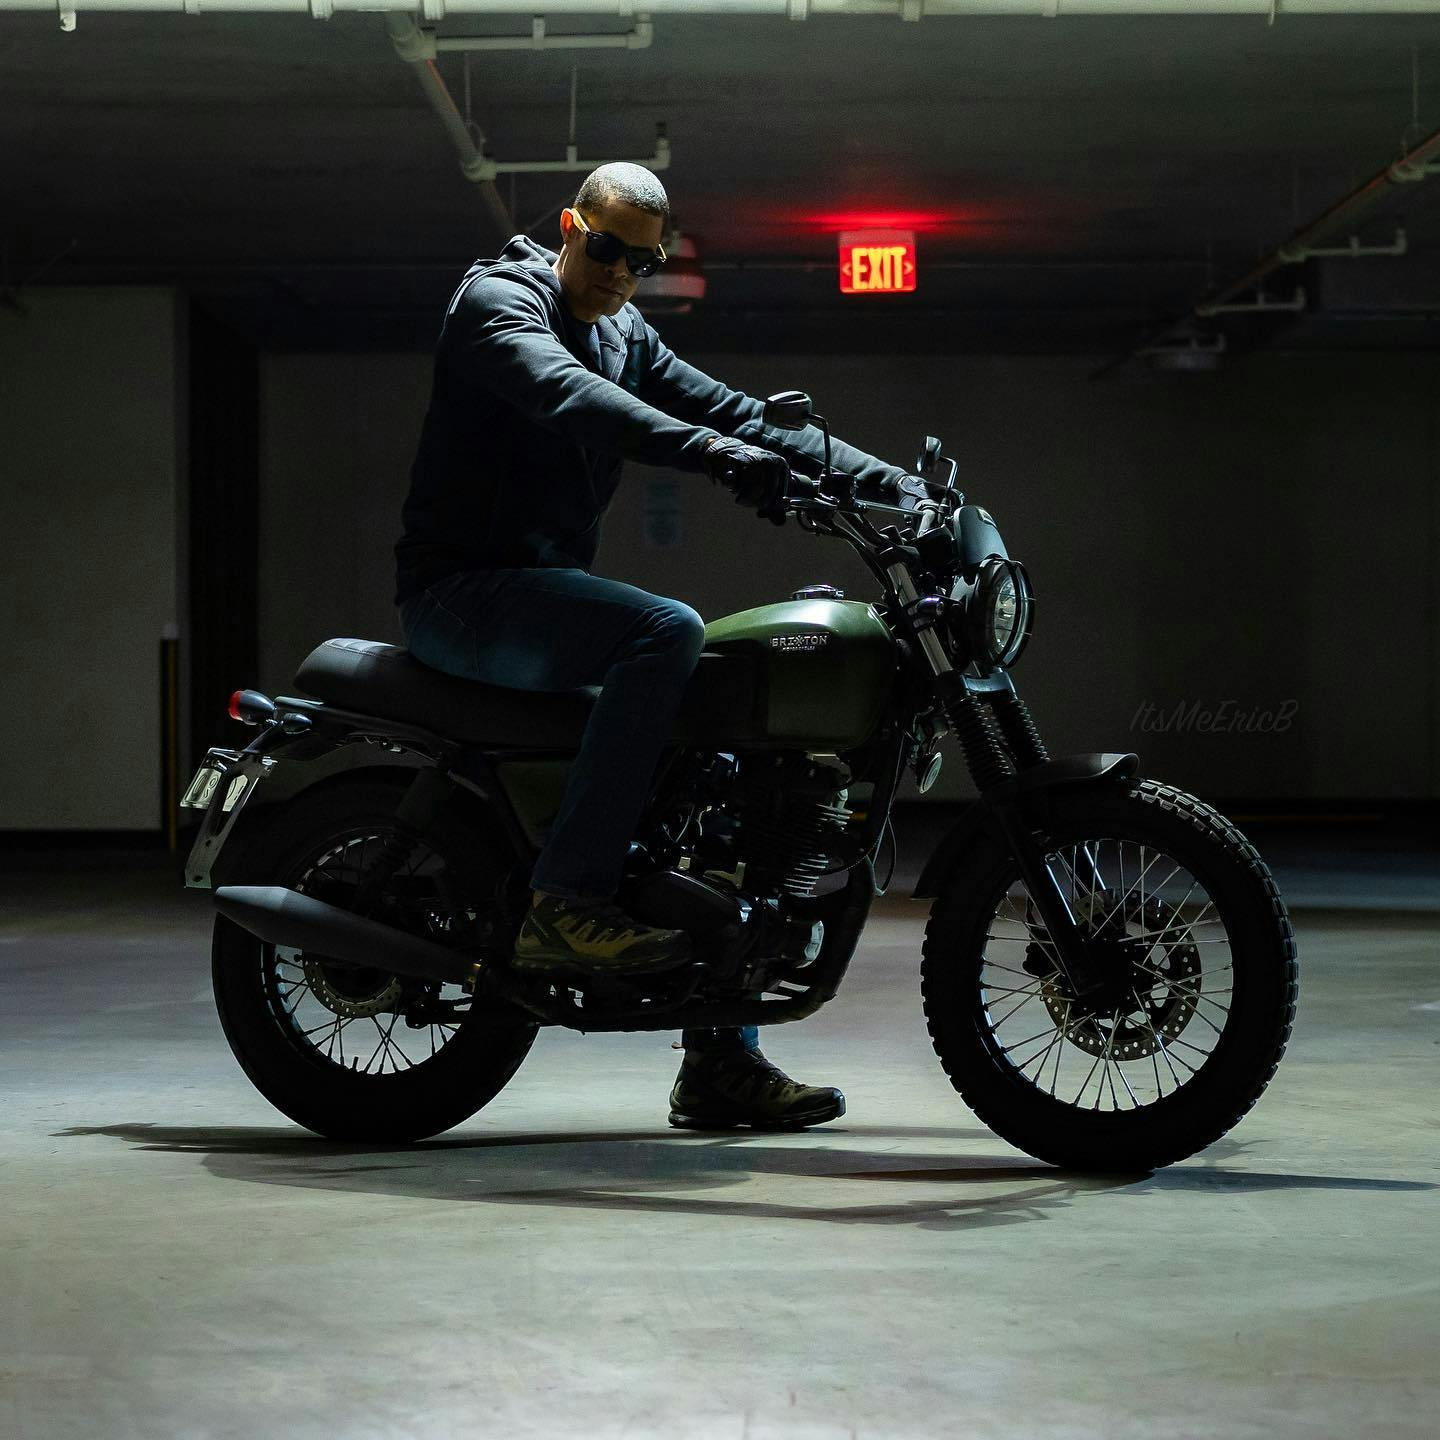 Brixton Felsberg 125 in Cargo Green standing in a dark garage with a rider sitting on top of it wearing a hooded vest and sunglasses, with an EXIT sign lit in the back